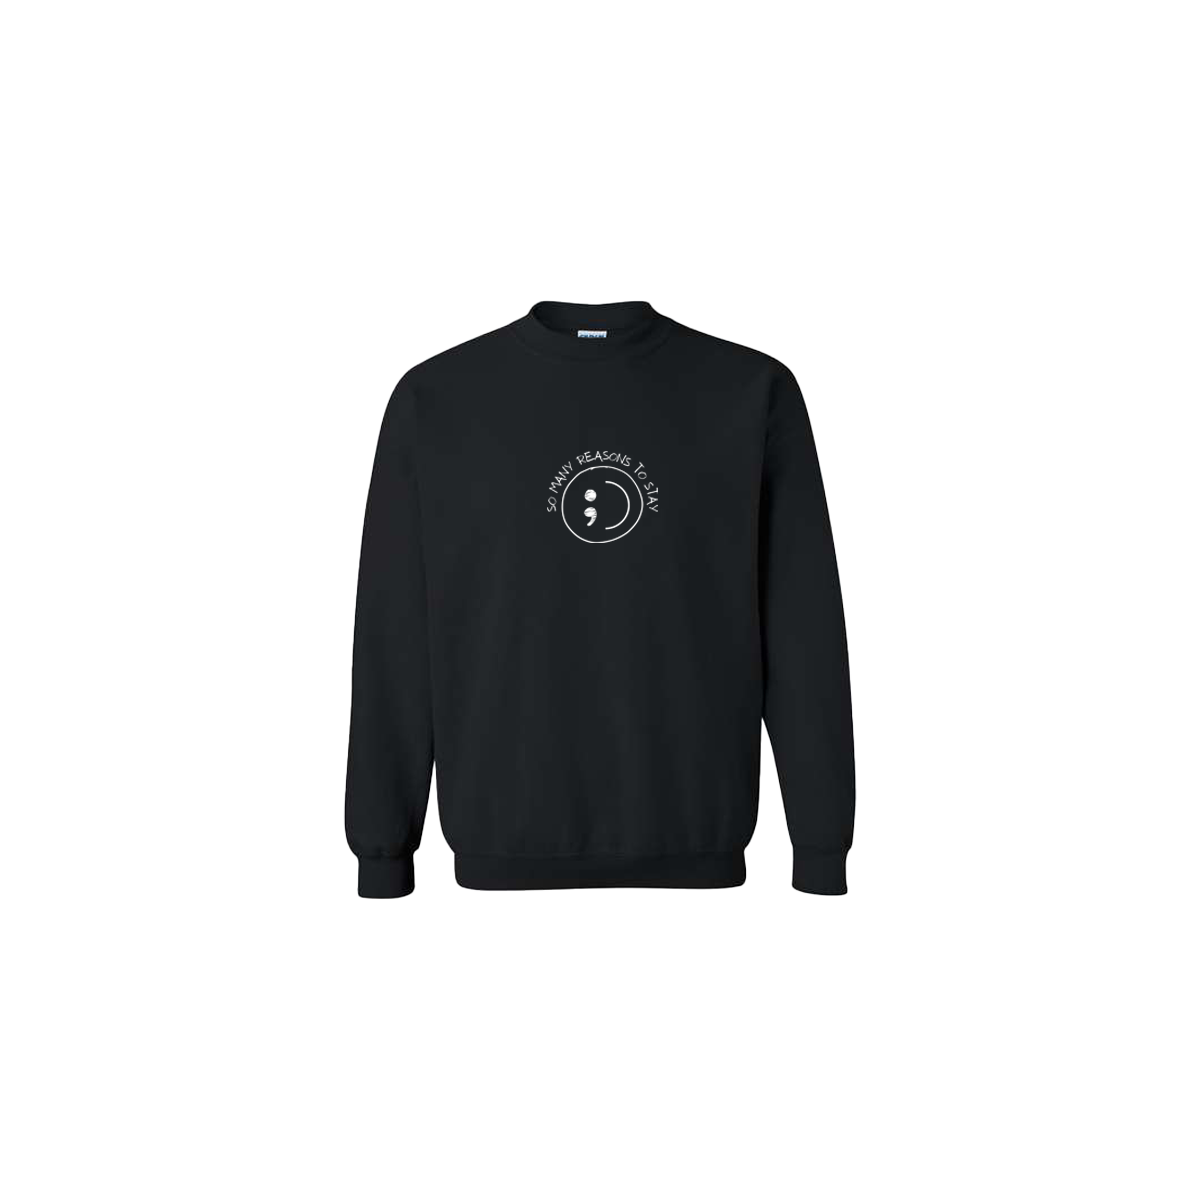 So Many Reasons to Stay Embroidered Black Crewneck - Mental Health Awa ...